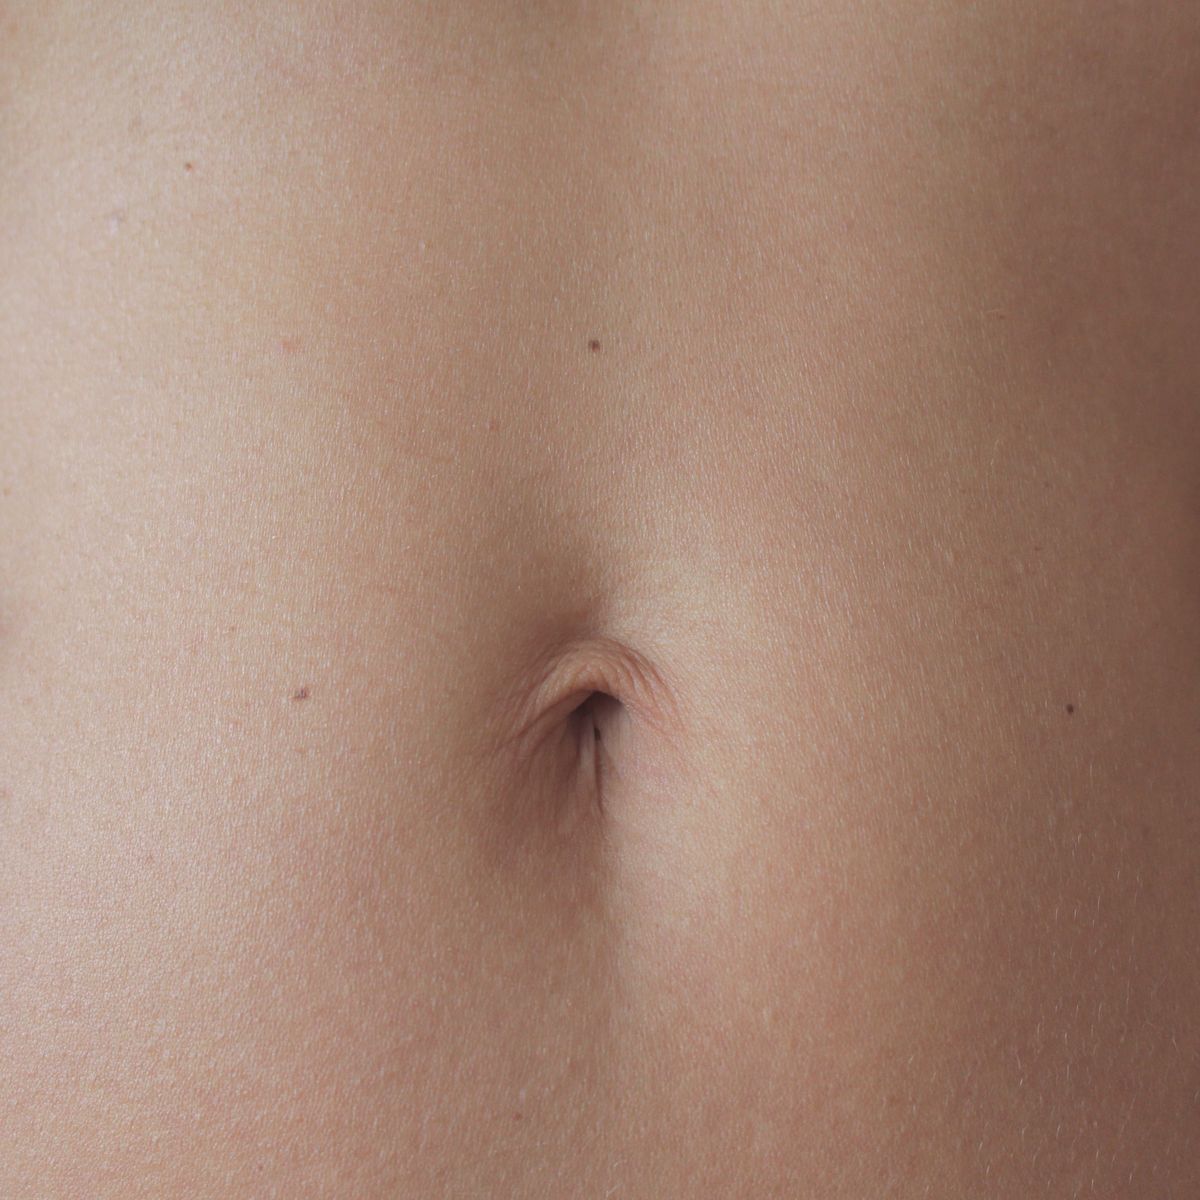 Ladies with deep belly buttons!